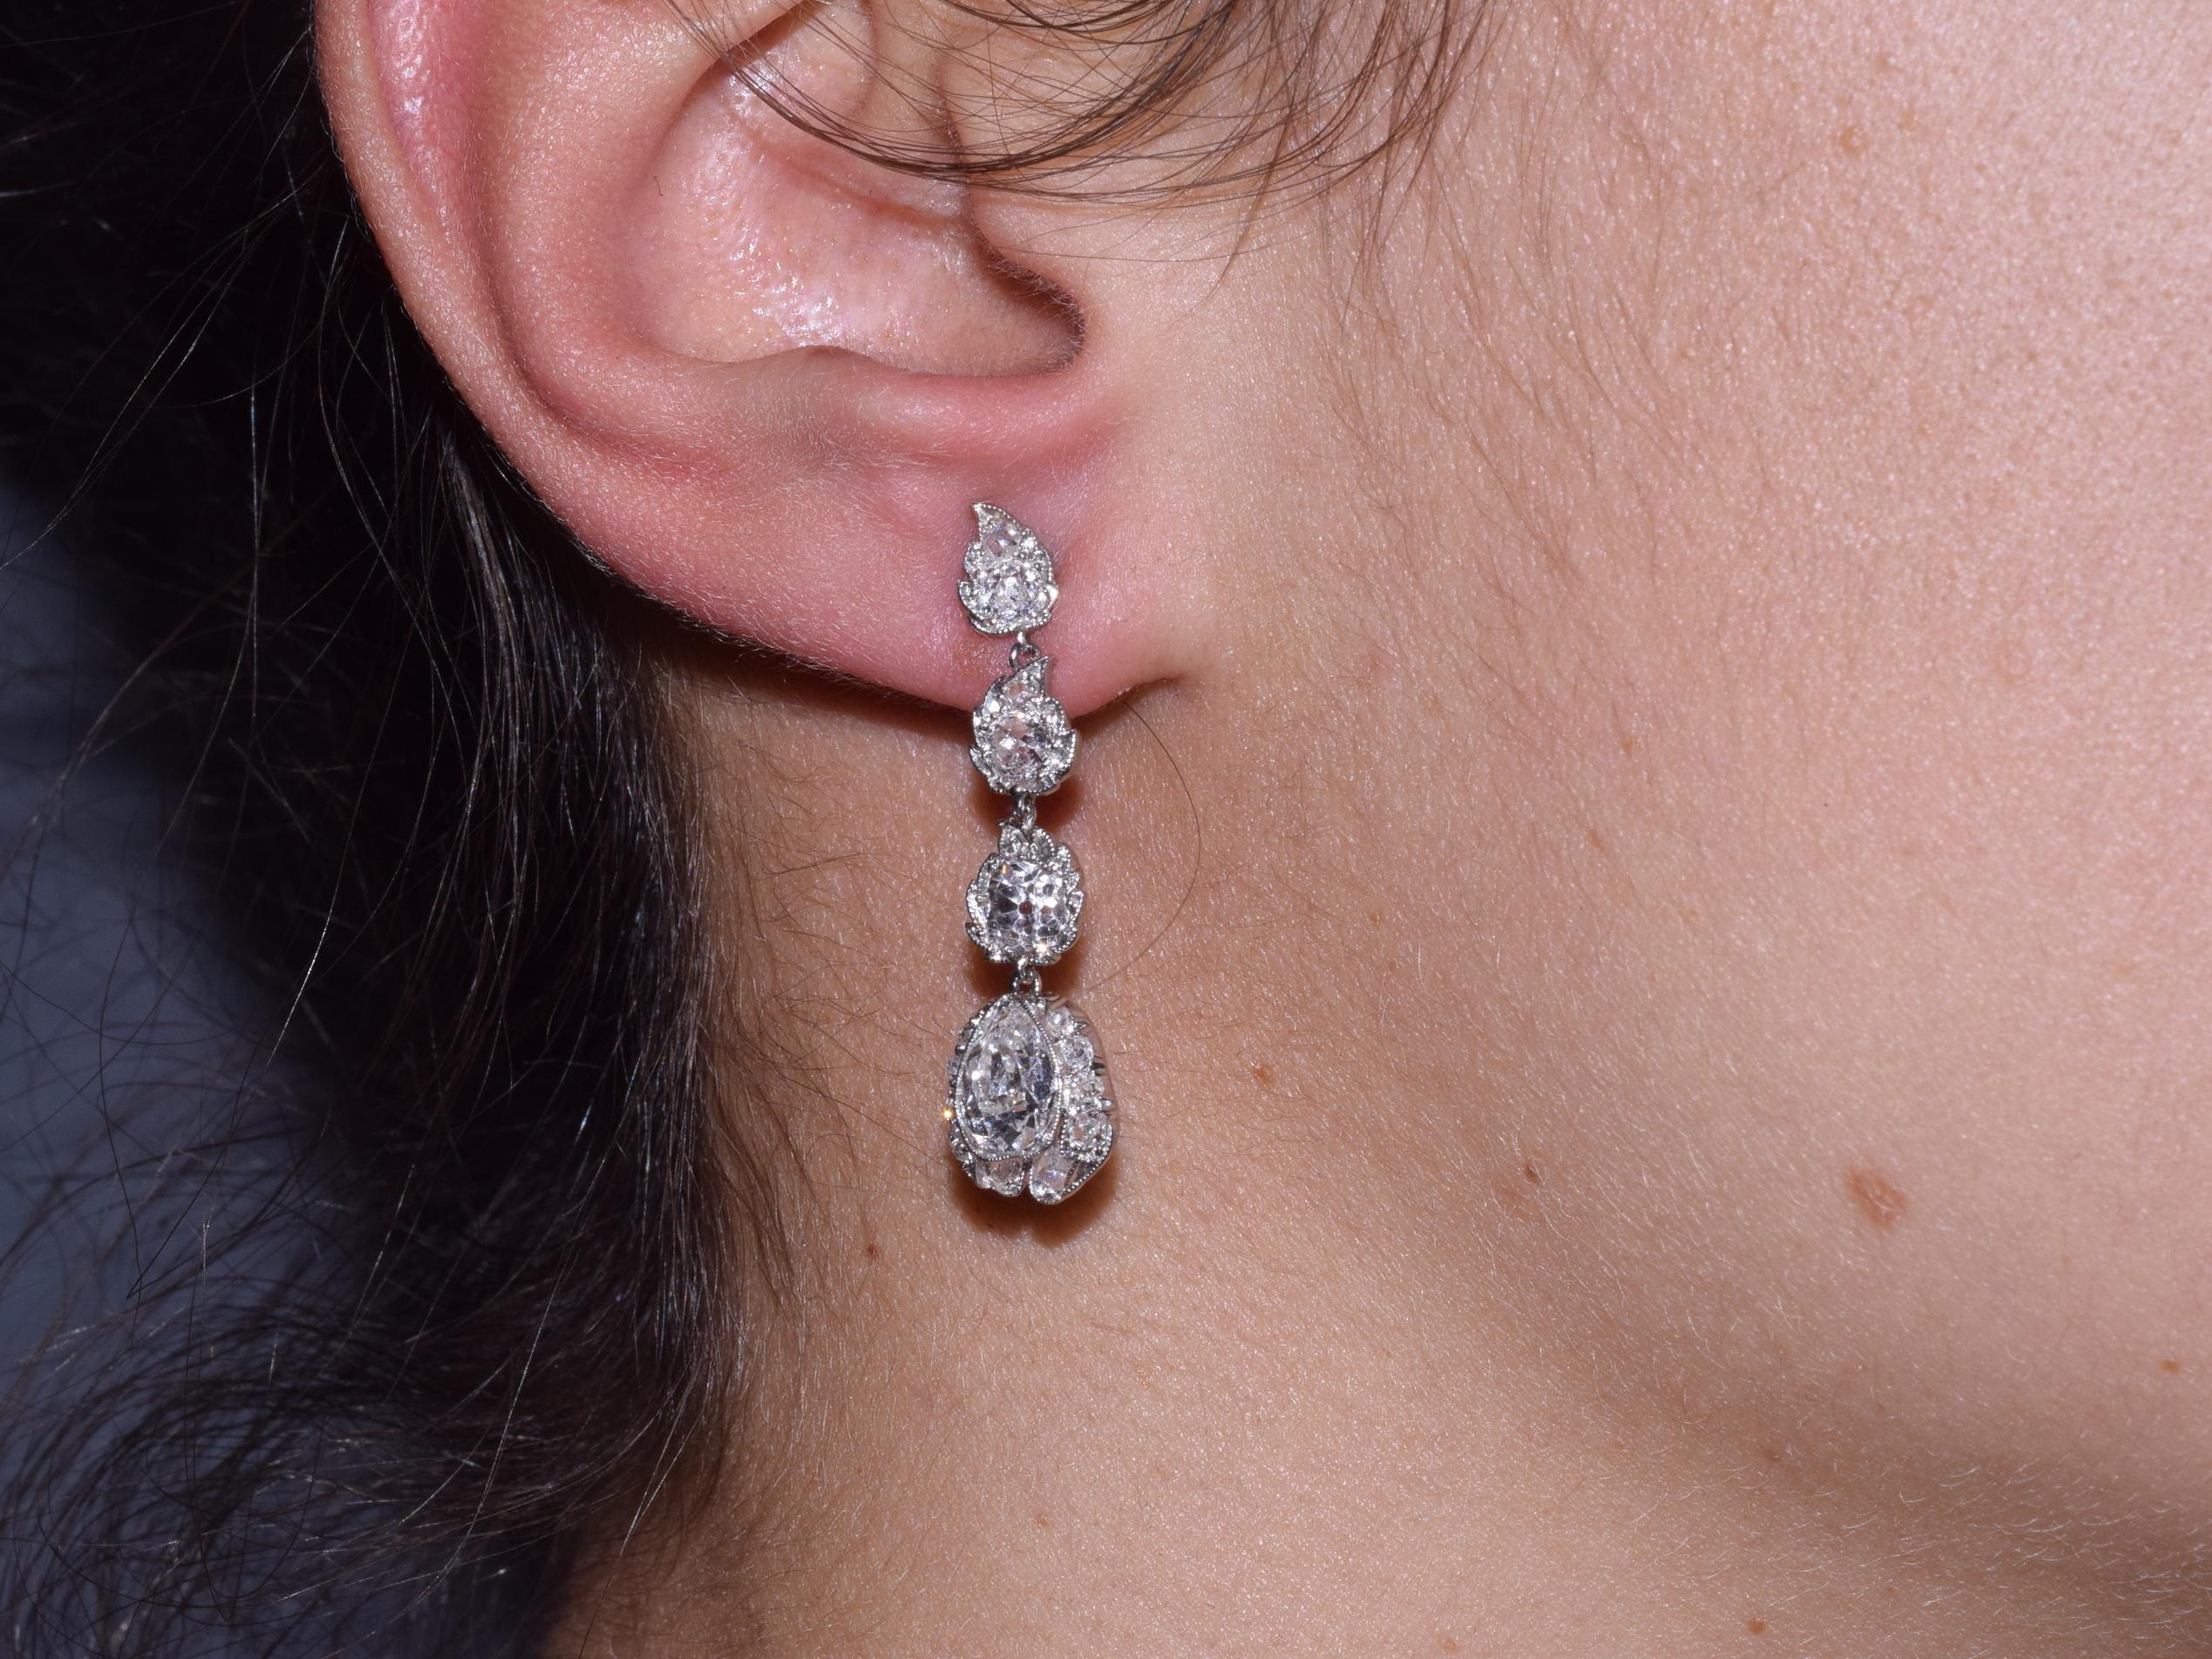 A total of approximately 4.25 carats of old mine diamonds form the leaves and buds of a stylized floral motif set in platinum. The earrings measure 1-3/8 inches in length and 3/8 inch at the widest point.